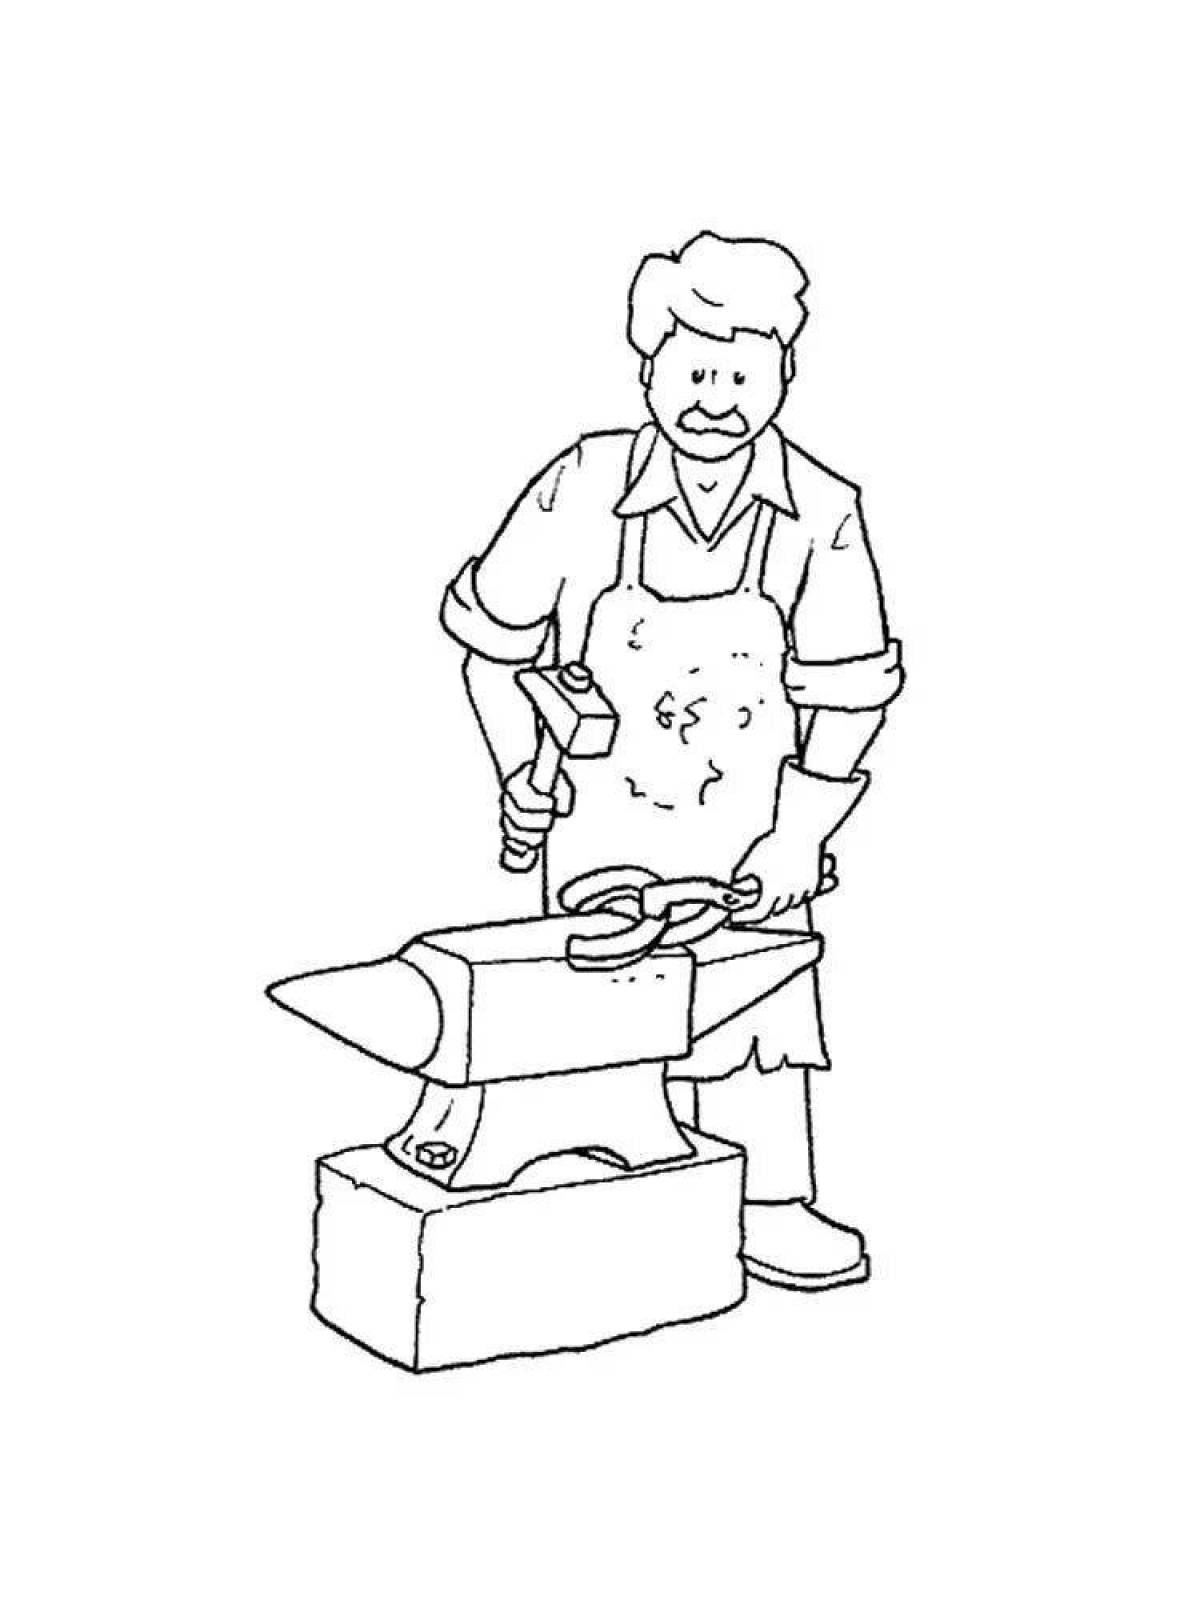 Animated blacksmith coloring page